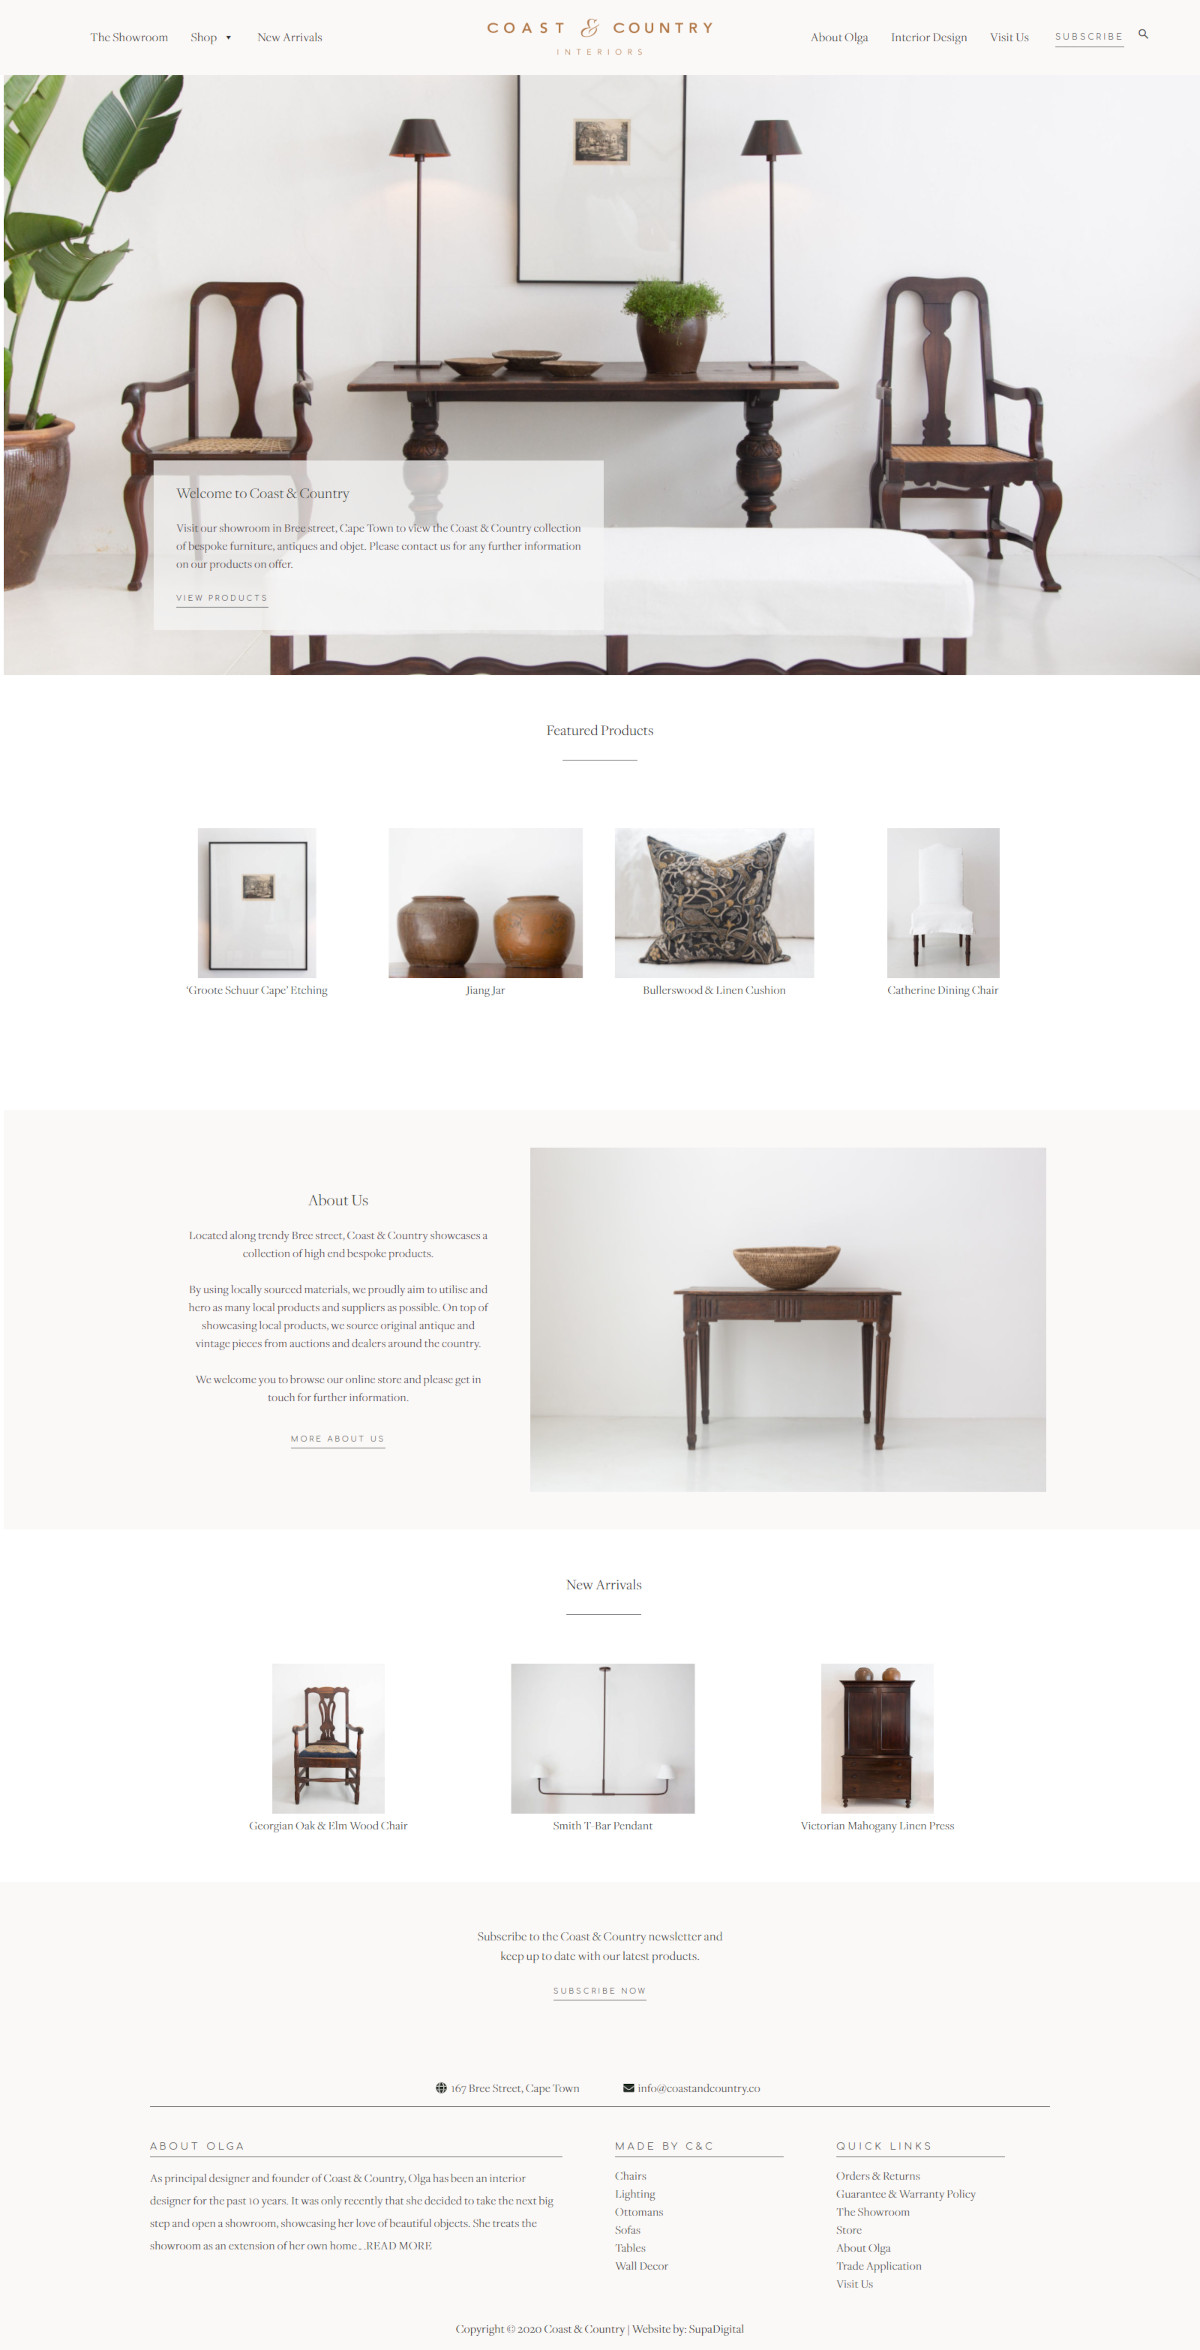 Ecommerce Store for Coast & Country Interior Decor